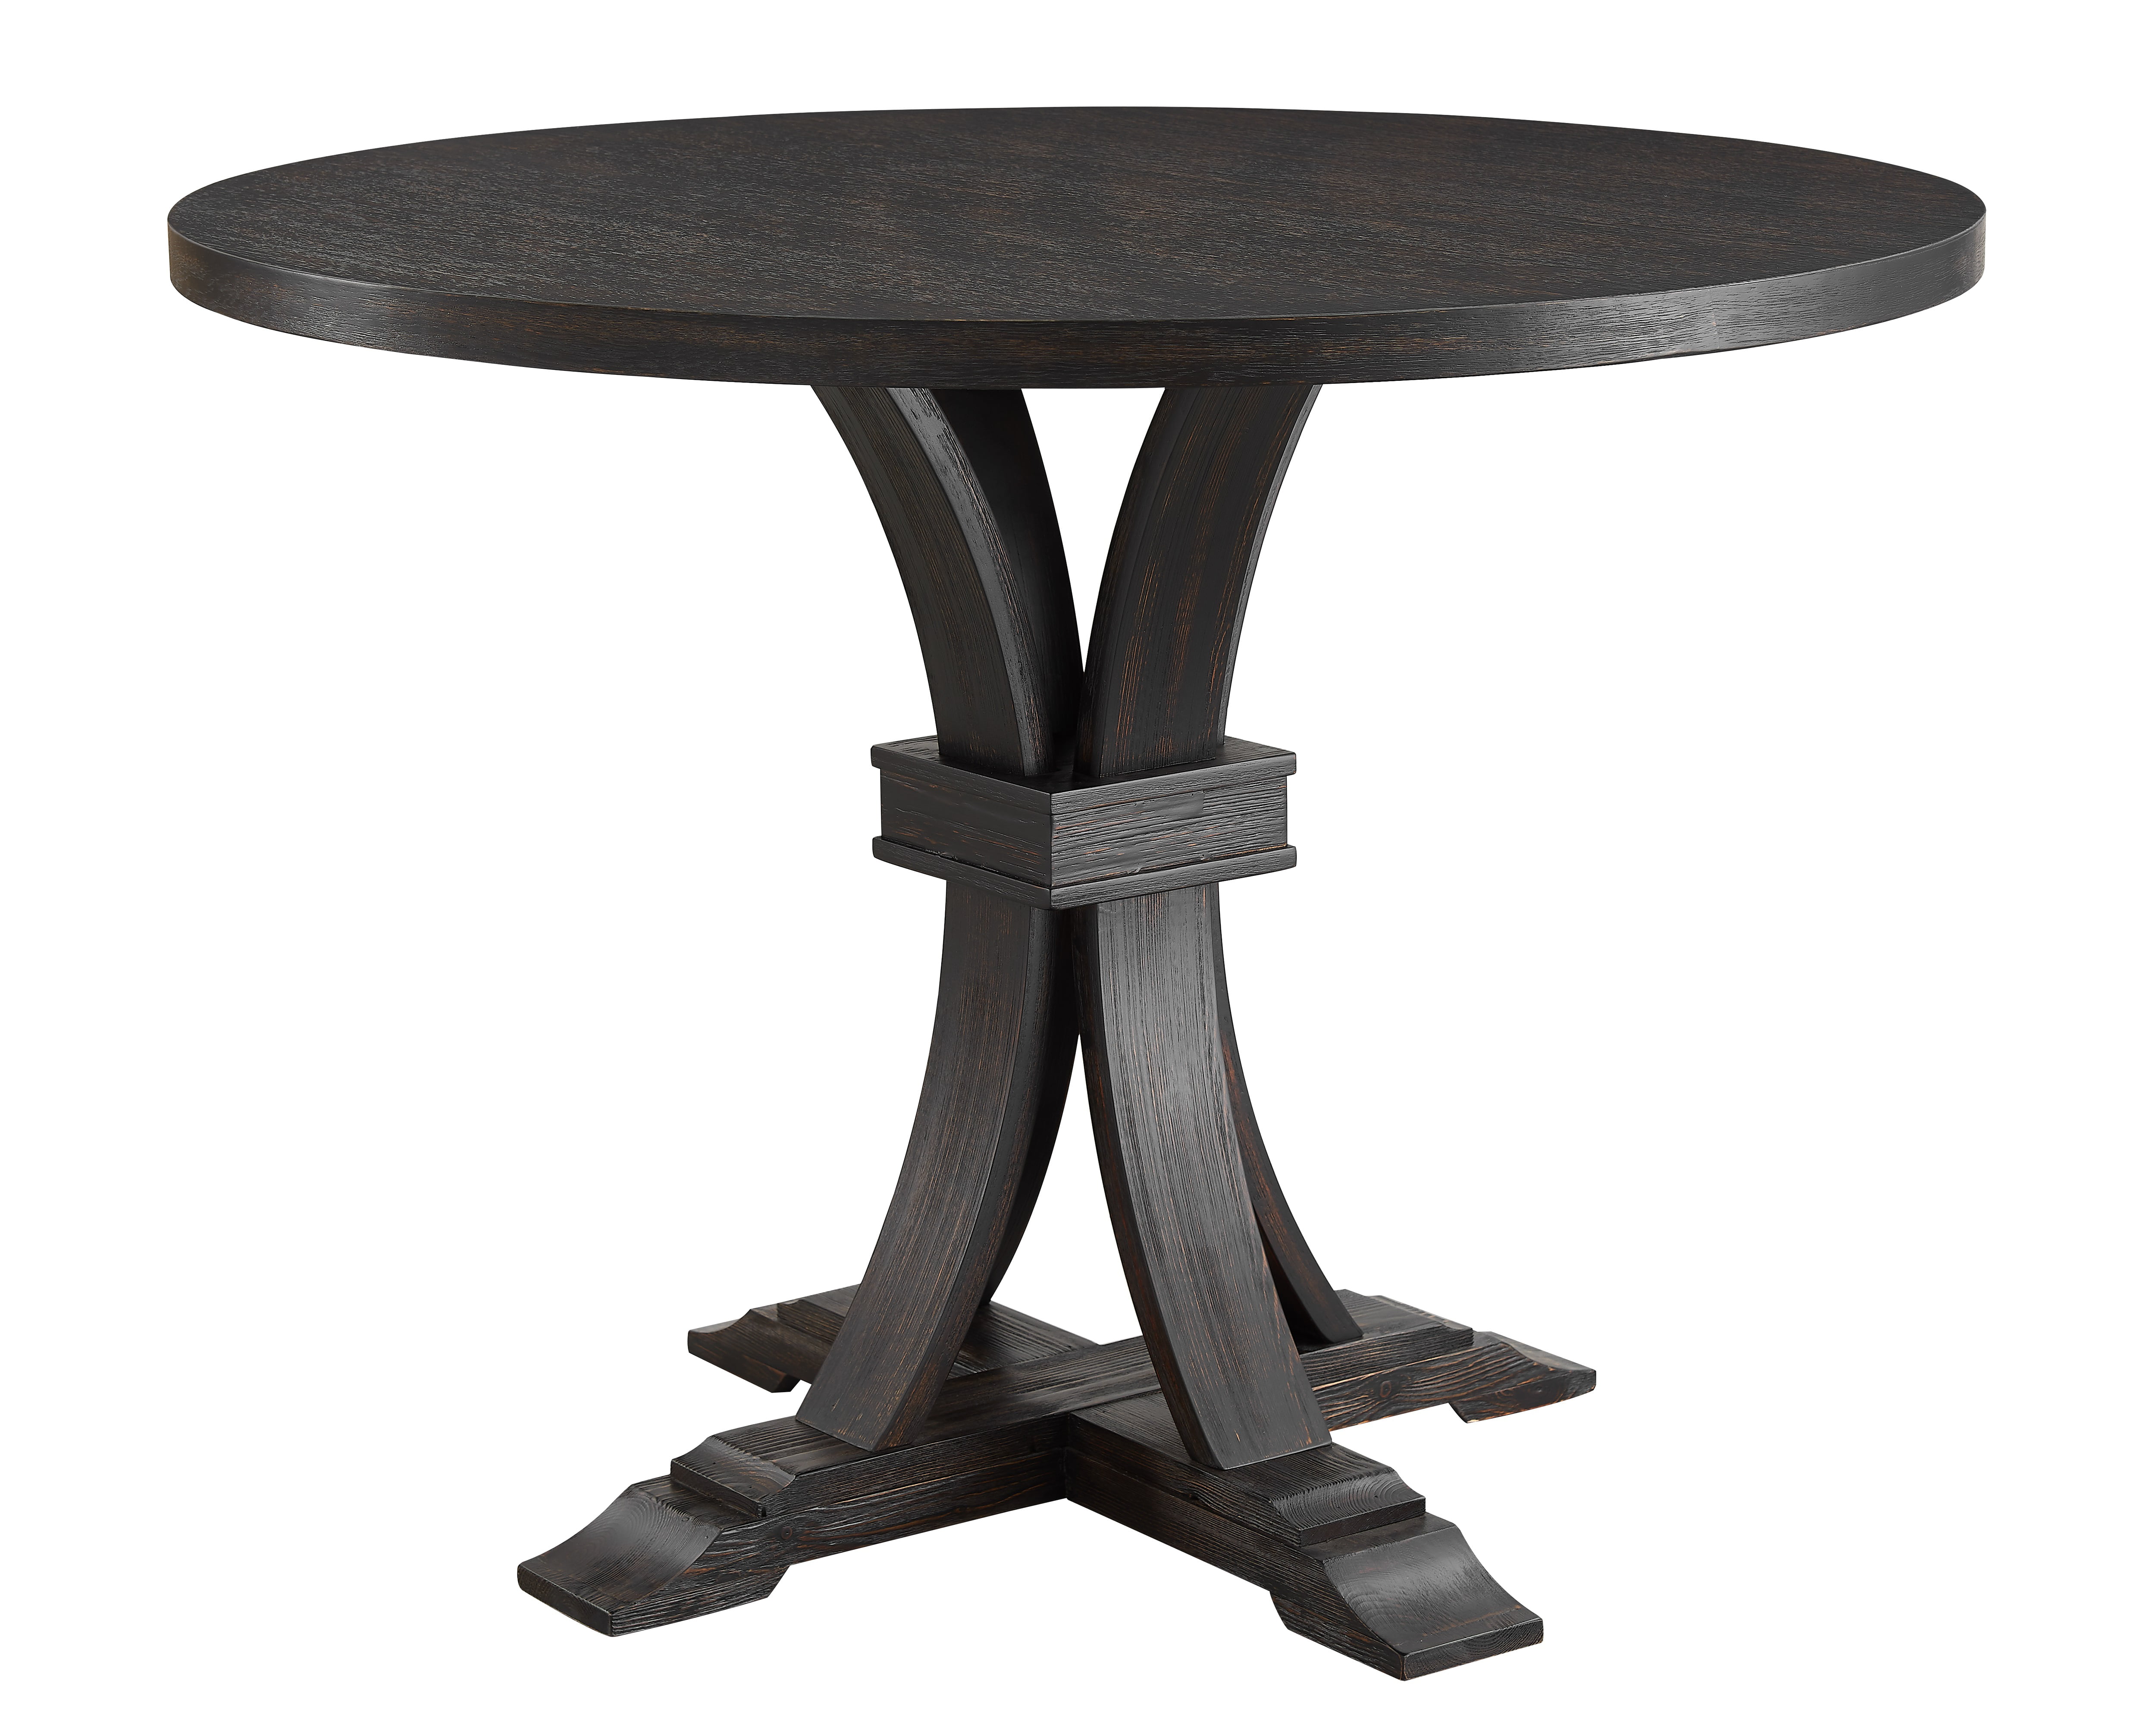 Siena Distressed Black Finish Round Pedestal Counter Height Dining